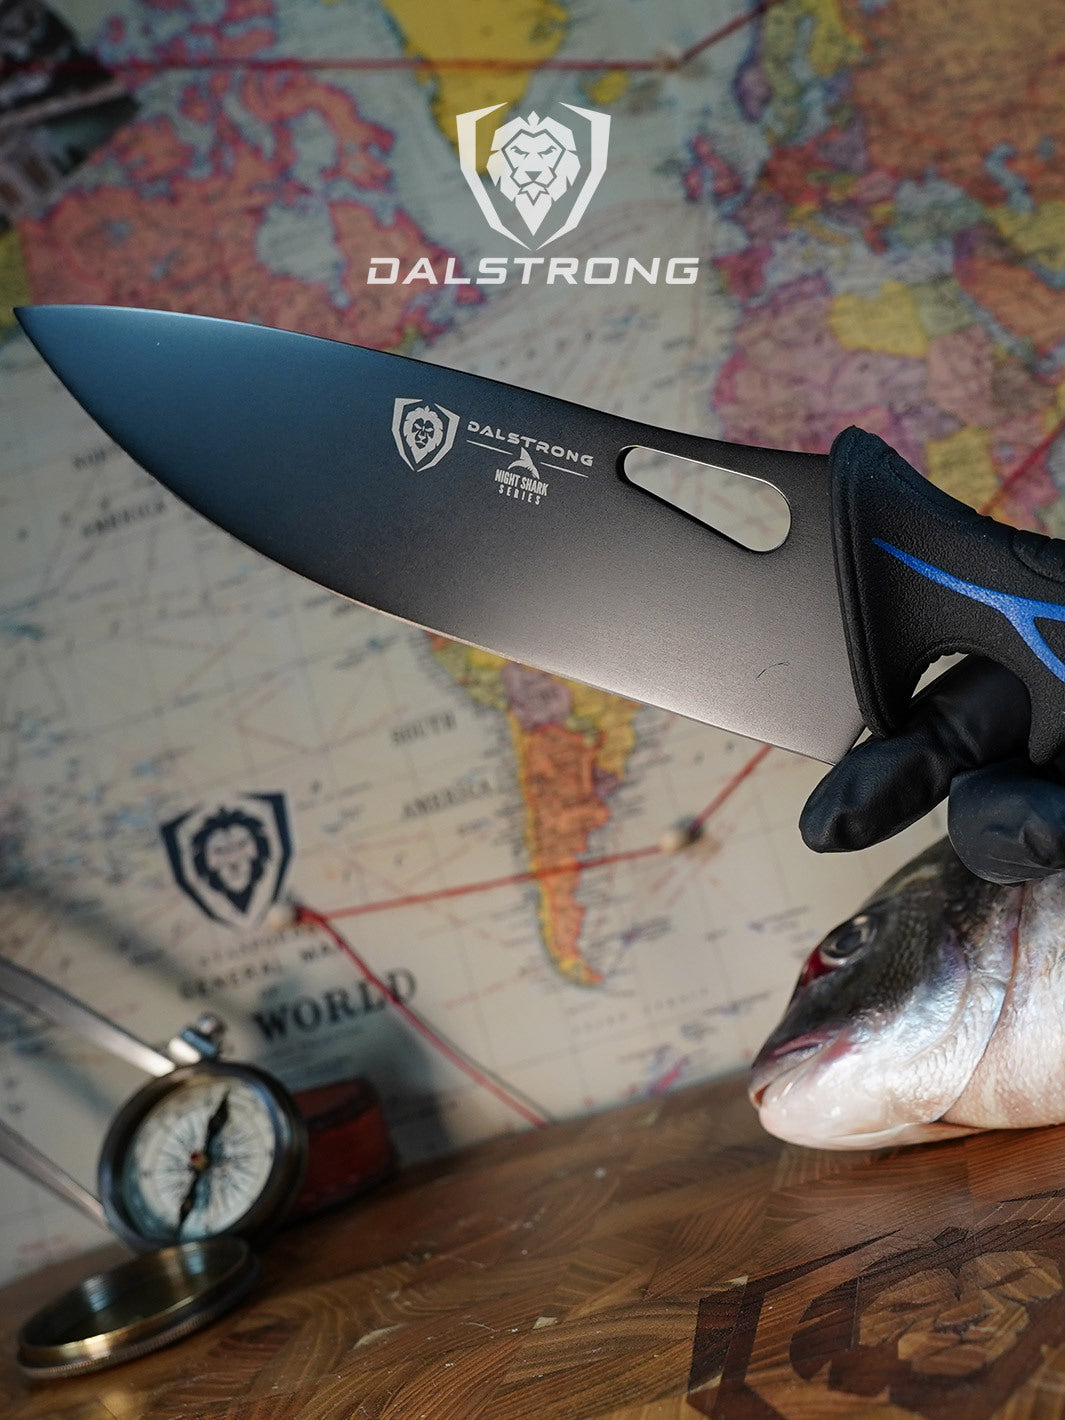 Chef's Knife 8" | Night Shark Series | NSF Certified | Dalstrong ©